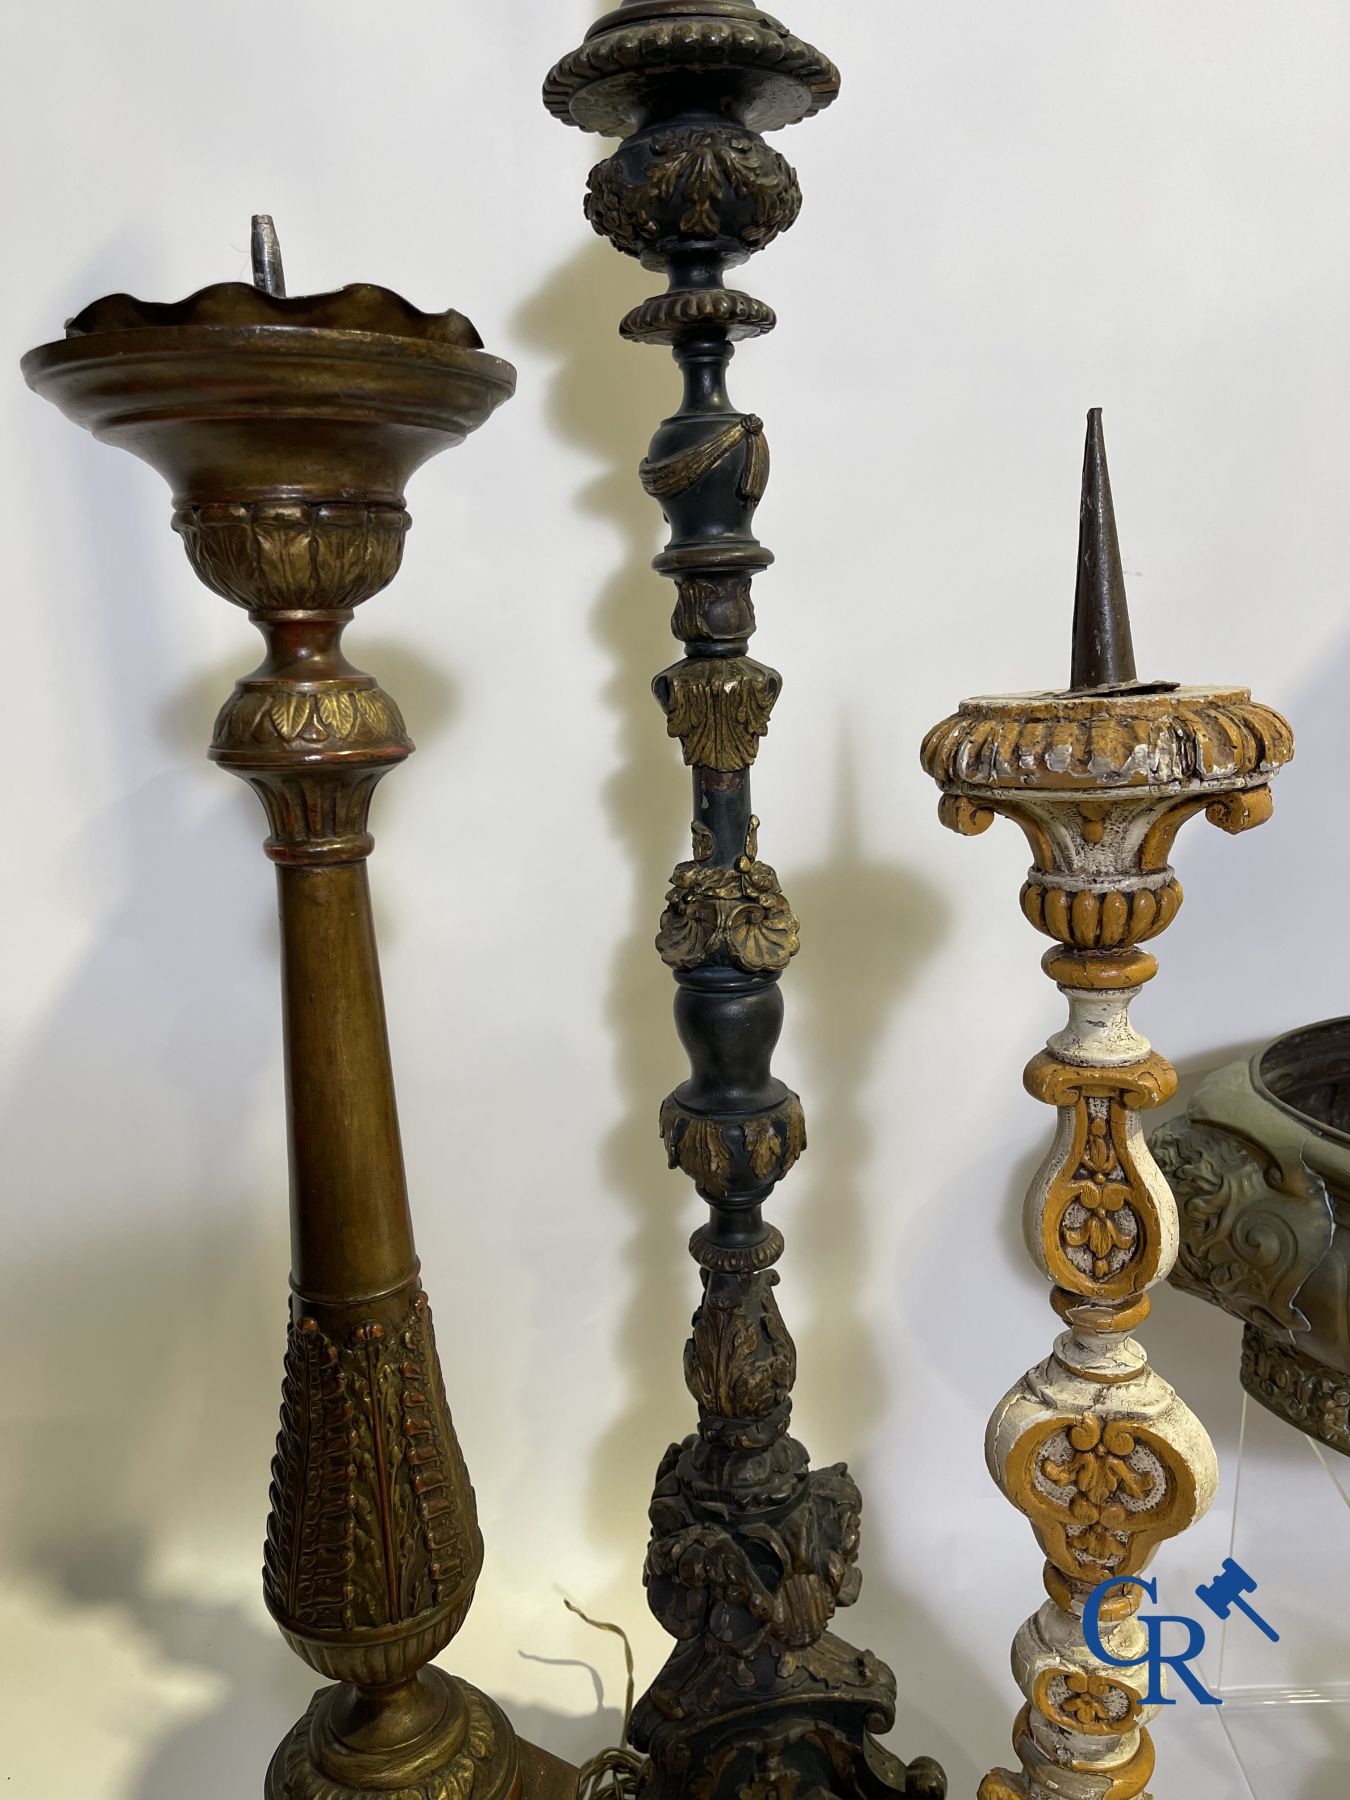 Lot of religious objects in wood and copper. 18th - 19th century. 4 candlesticks, a copper jardinier - Image 10 of 16